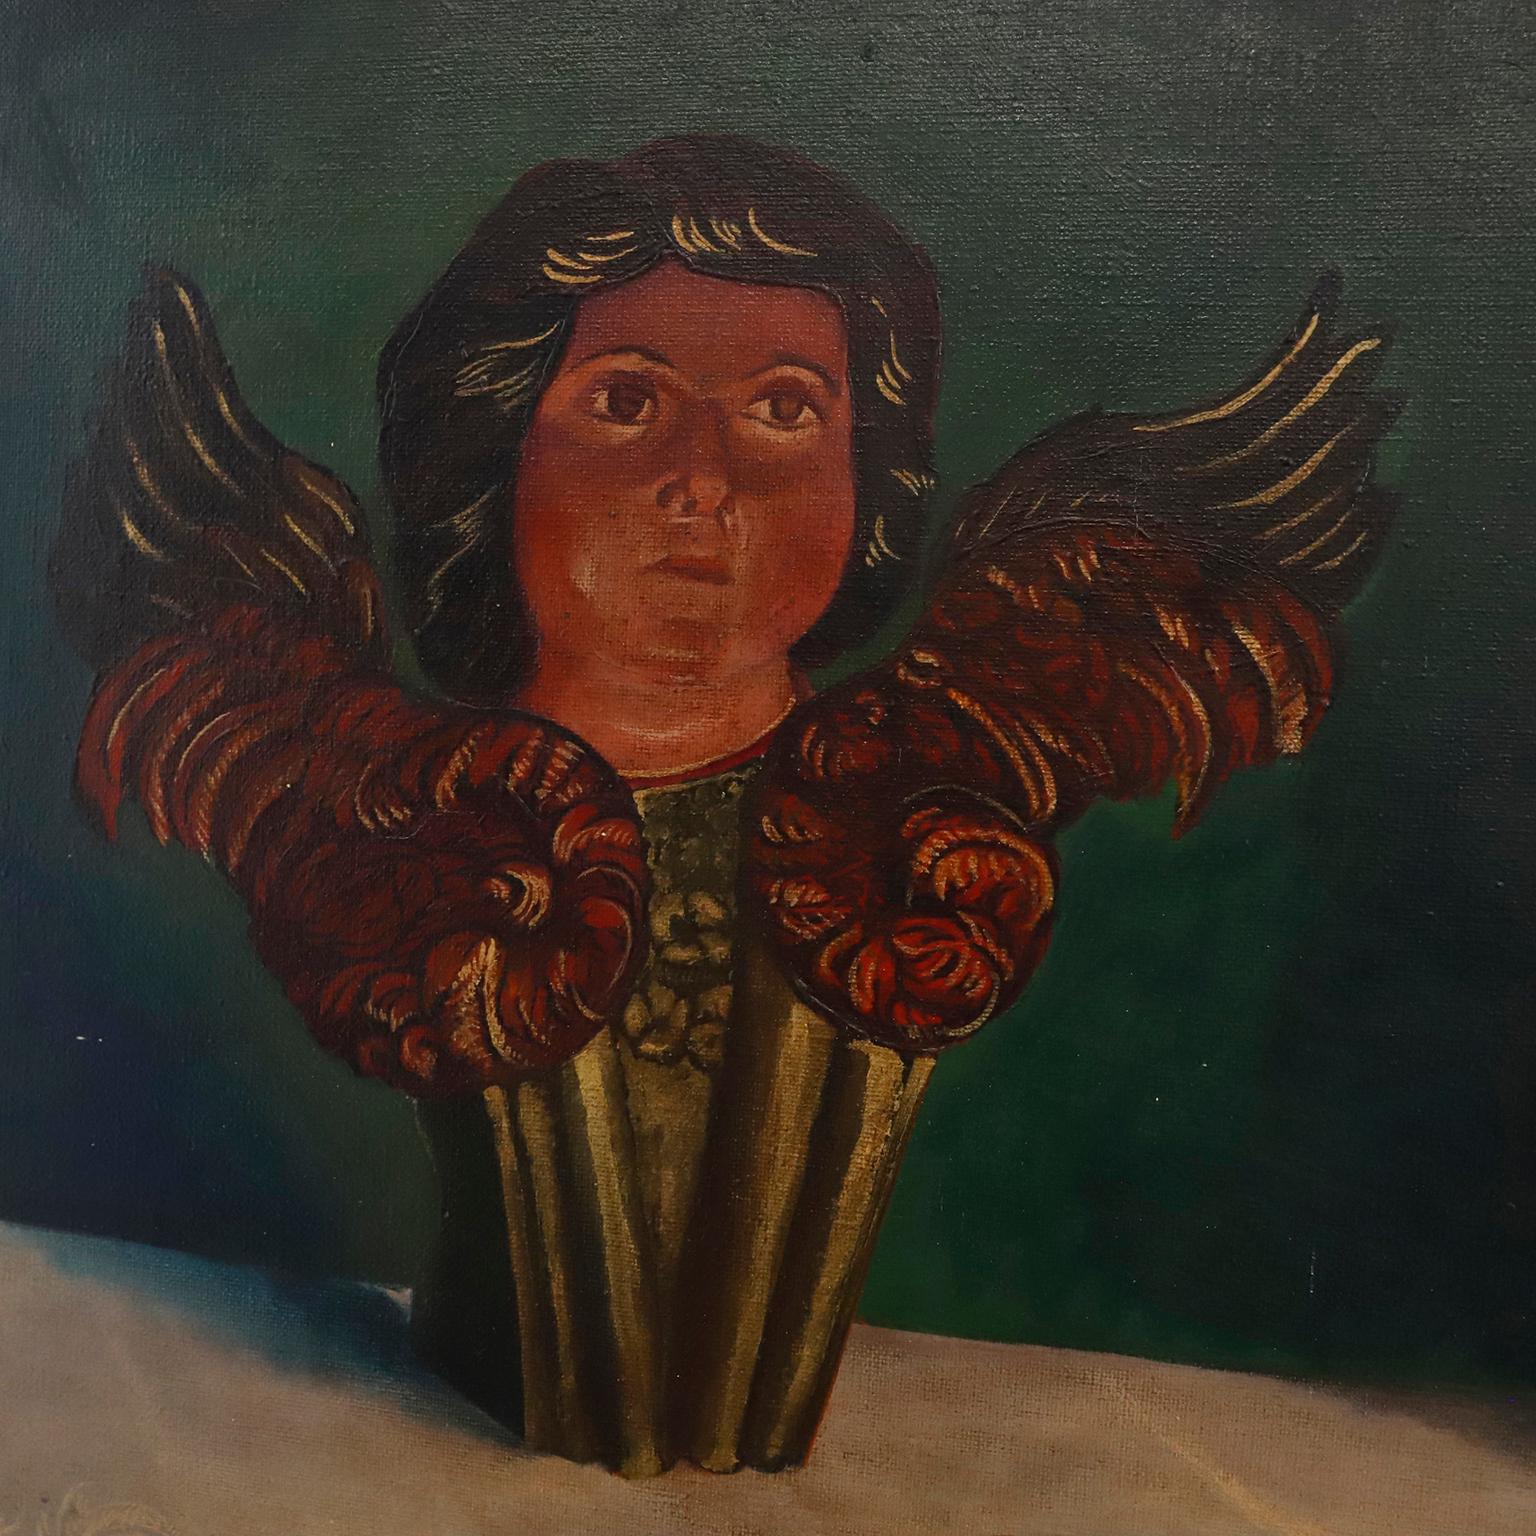 We offer this rare and original handmade painted in oil on canvas by Mexican painter Ismael Rivera, includes signature, circa 1950.